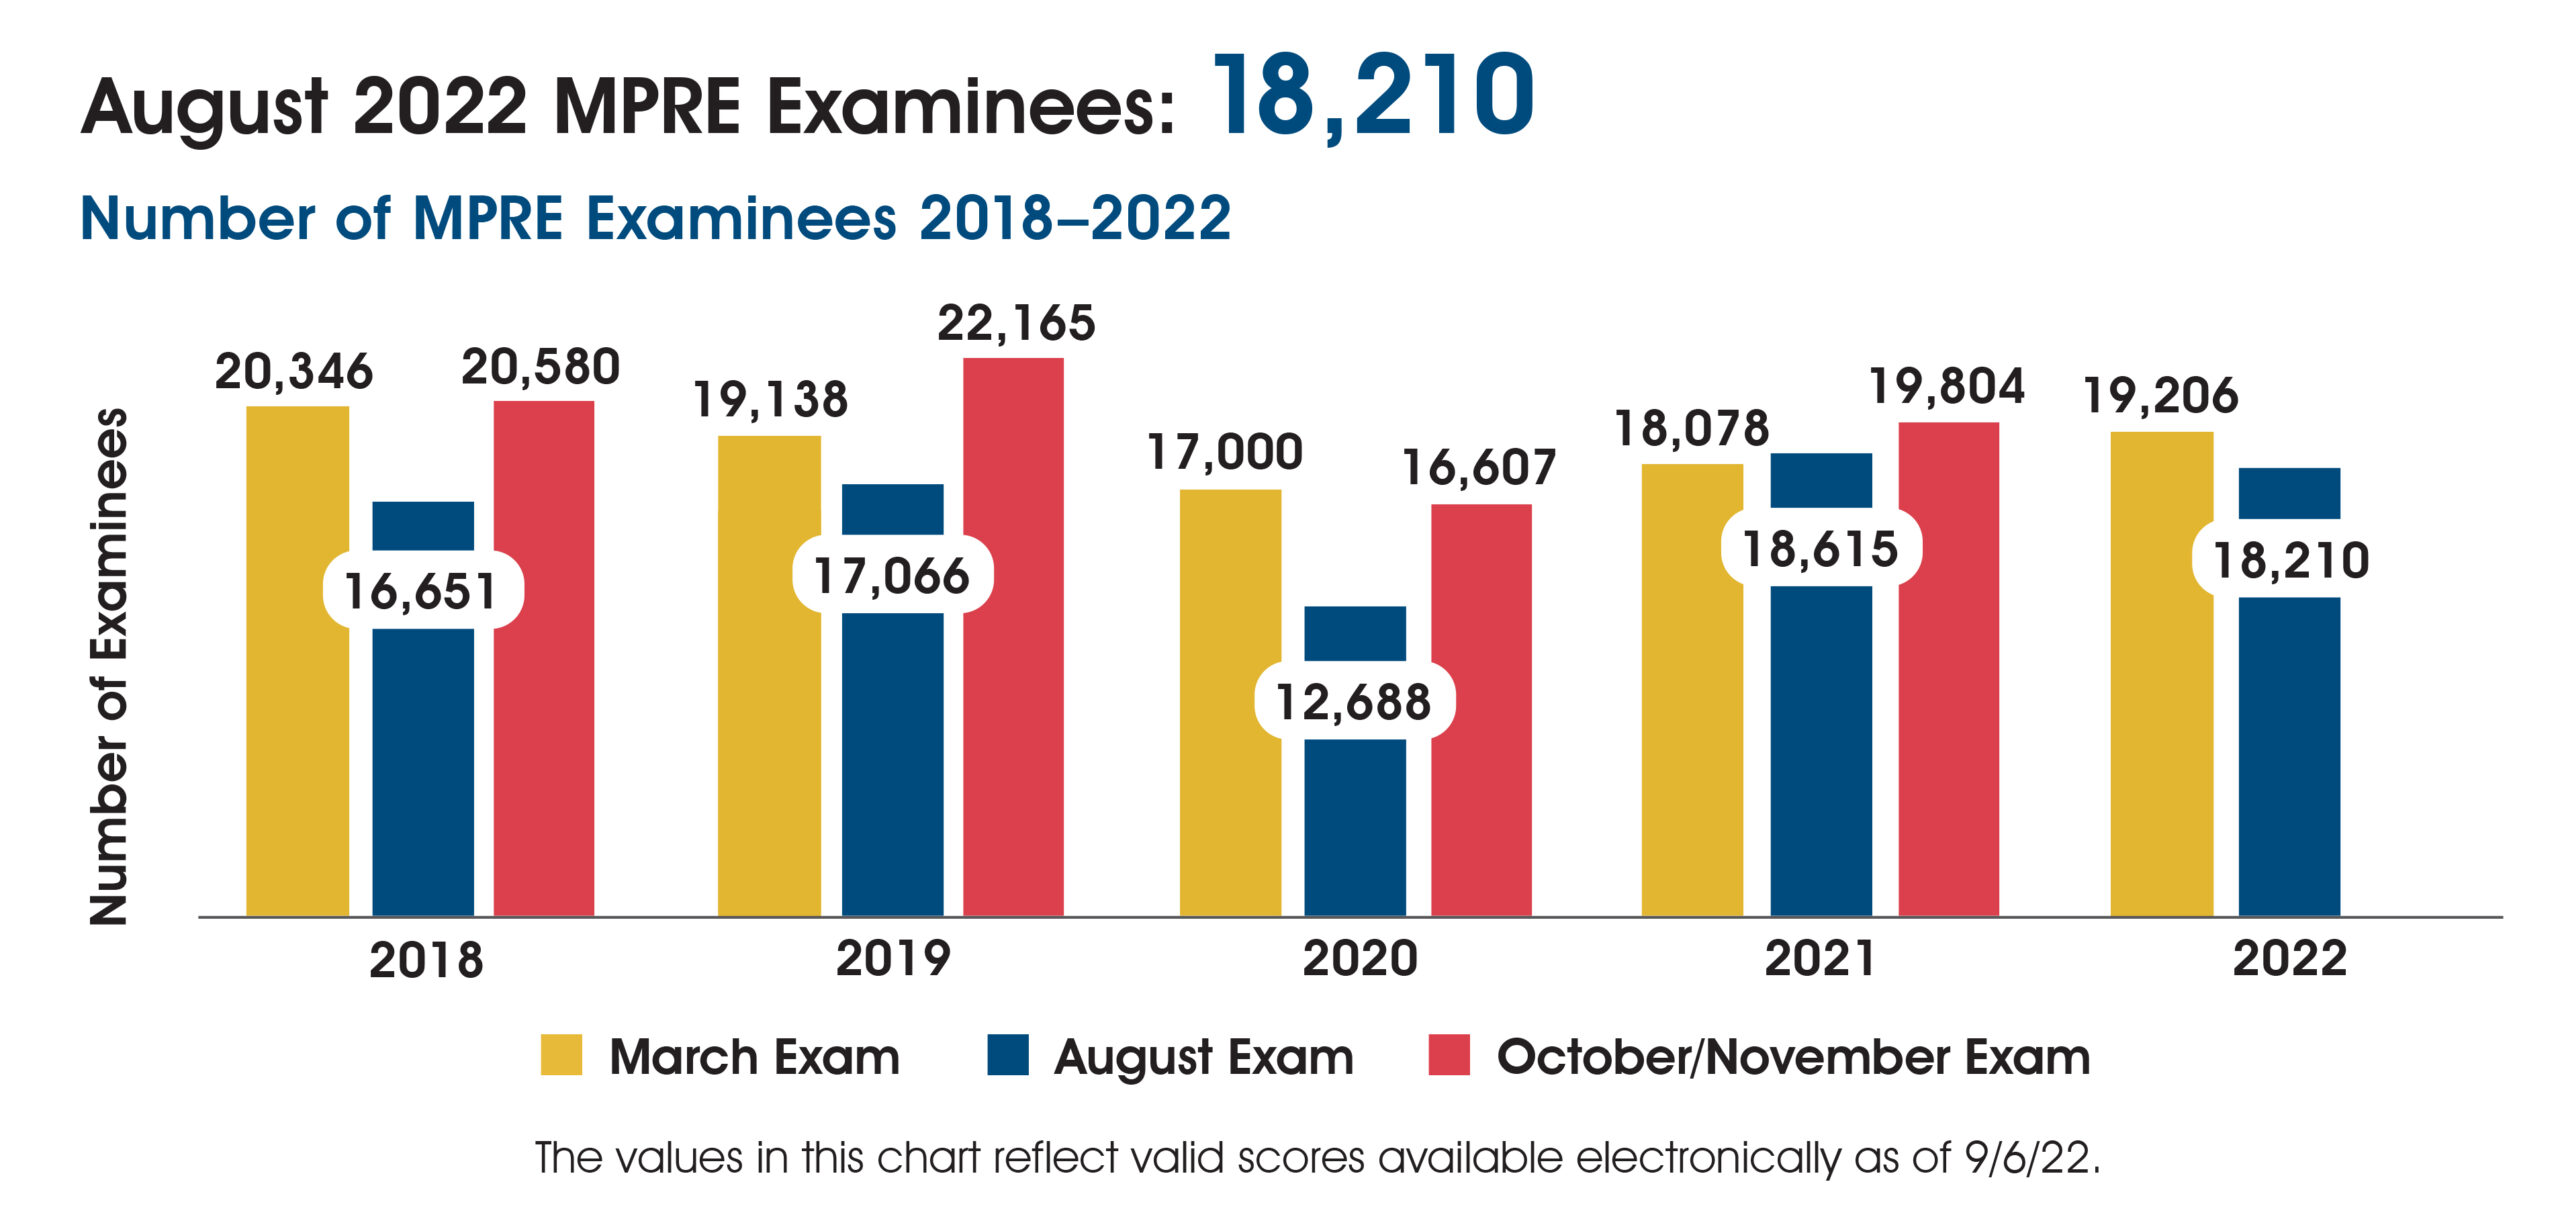 A chart showing the number of MPRE examinees 2018-2022. In March 2018-2022 there were 20,346; 19,138; 17,000; 18,078; and 19,206 examinees. In August 2018-2022 there were 16,651; 17,066; 12,688; 18,615; and 18,210 examinees. In October/November 2018-2021 there were 20,580; 22,165; 16,607; and 19,804 examinees. The chart includes the following note: The values in this chart reflect valid scores available electronically as of 9/6/22.